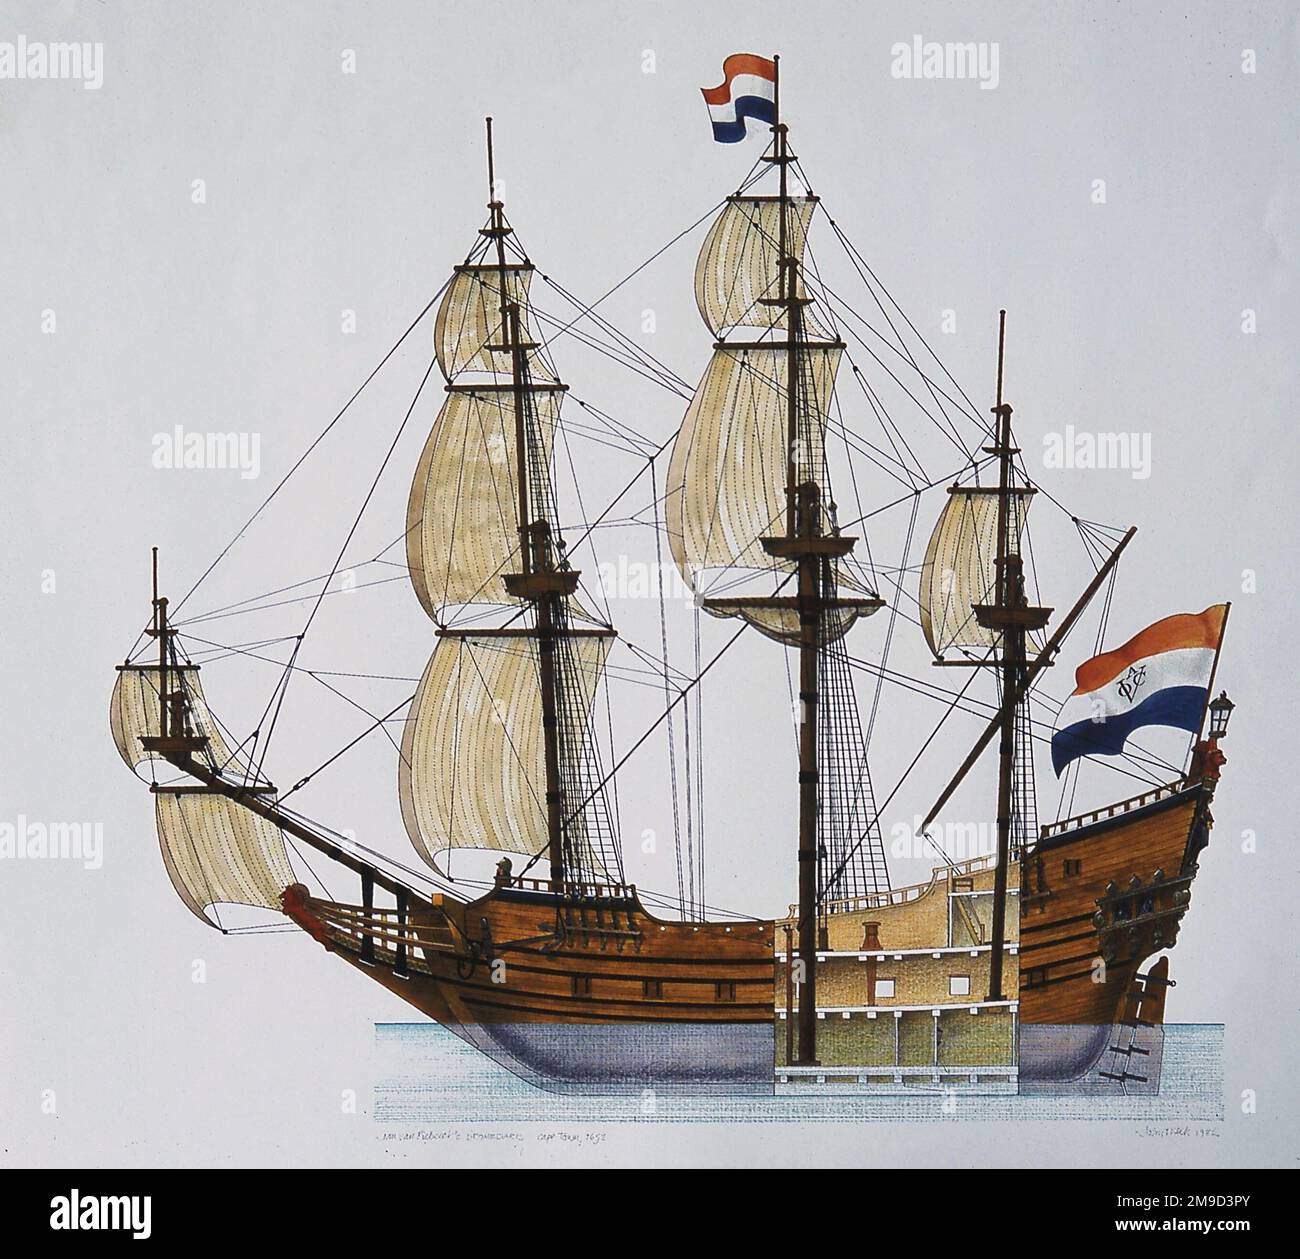 Dromedaris, armed merchantman of Dutch East India Company, commanded by Jan van Riebeeck, who sailed it to Table Bay, hoisted the Dutch flag and founded South Africa, 1652. Stock Photo